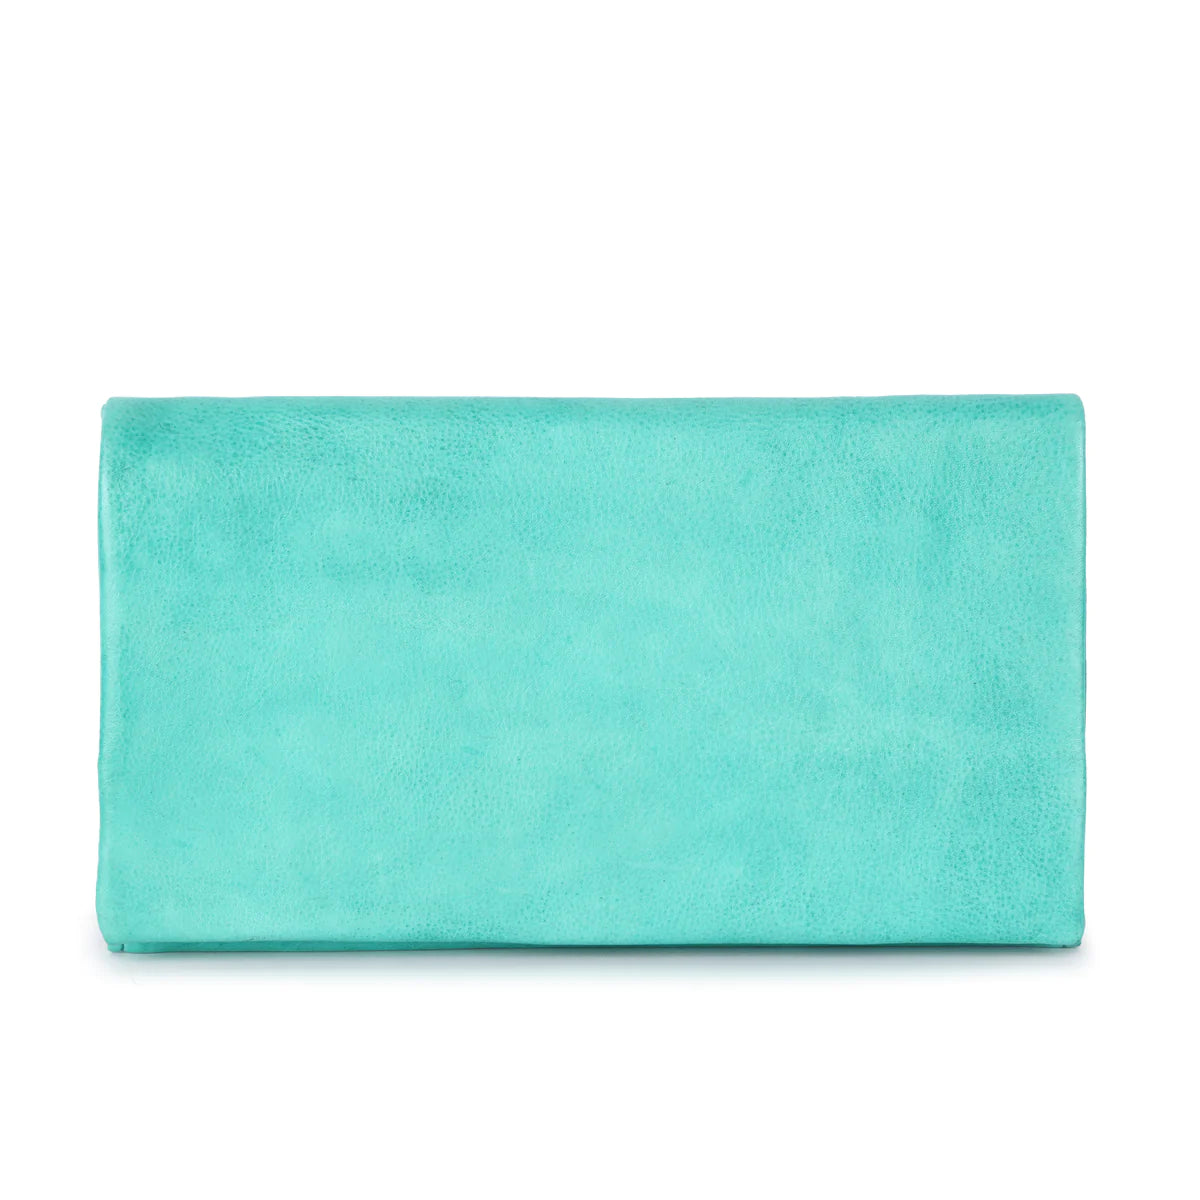 Eloise Wallet - Turquoise